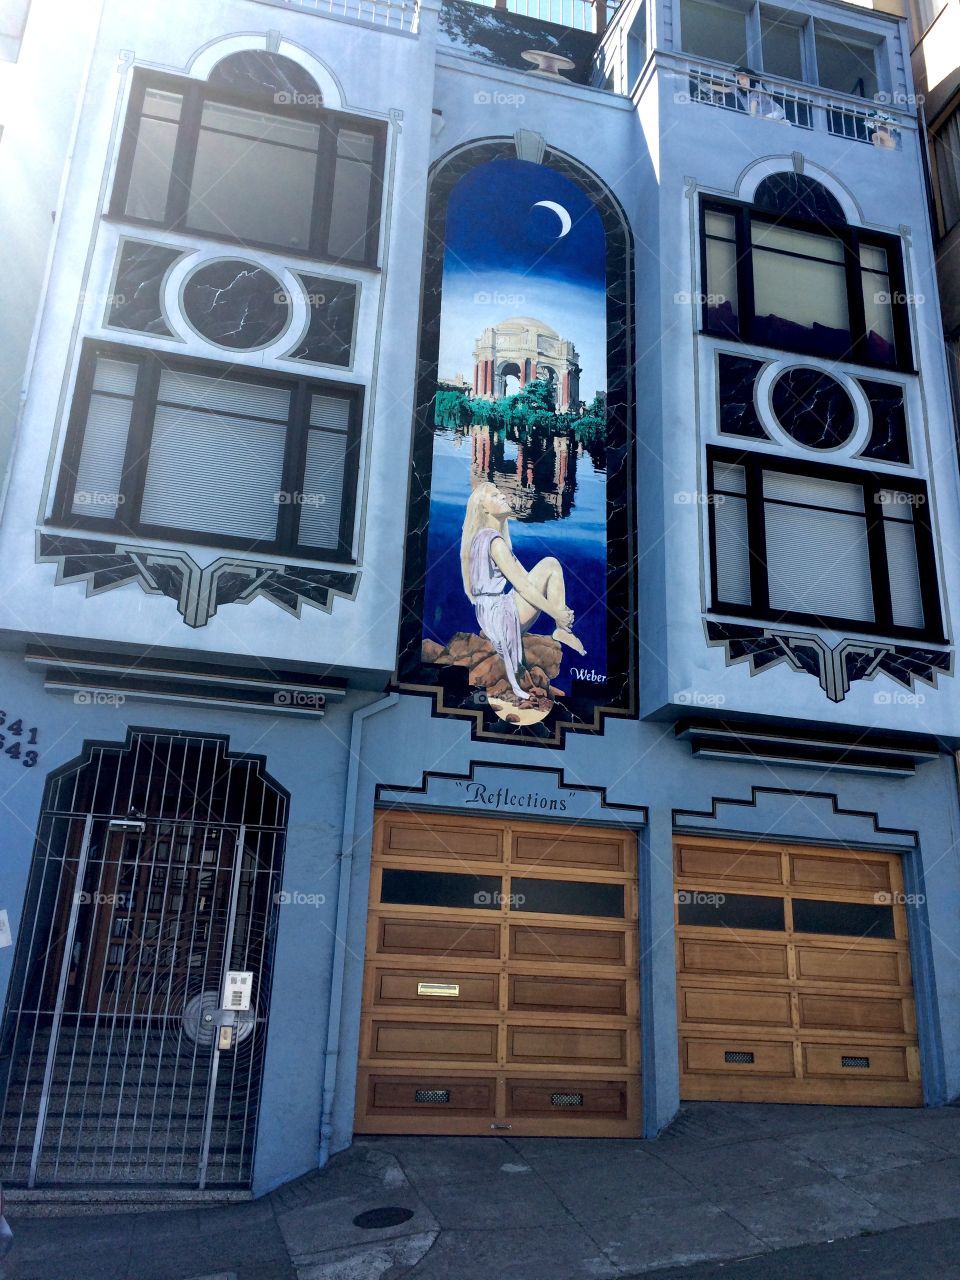 San Francisco Art. Street art always brightens up a city by its radiant beauty. 